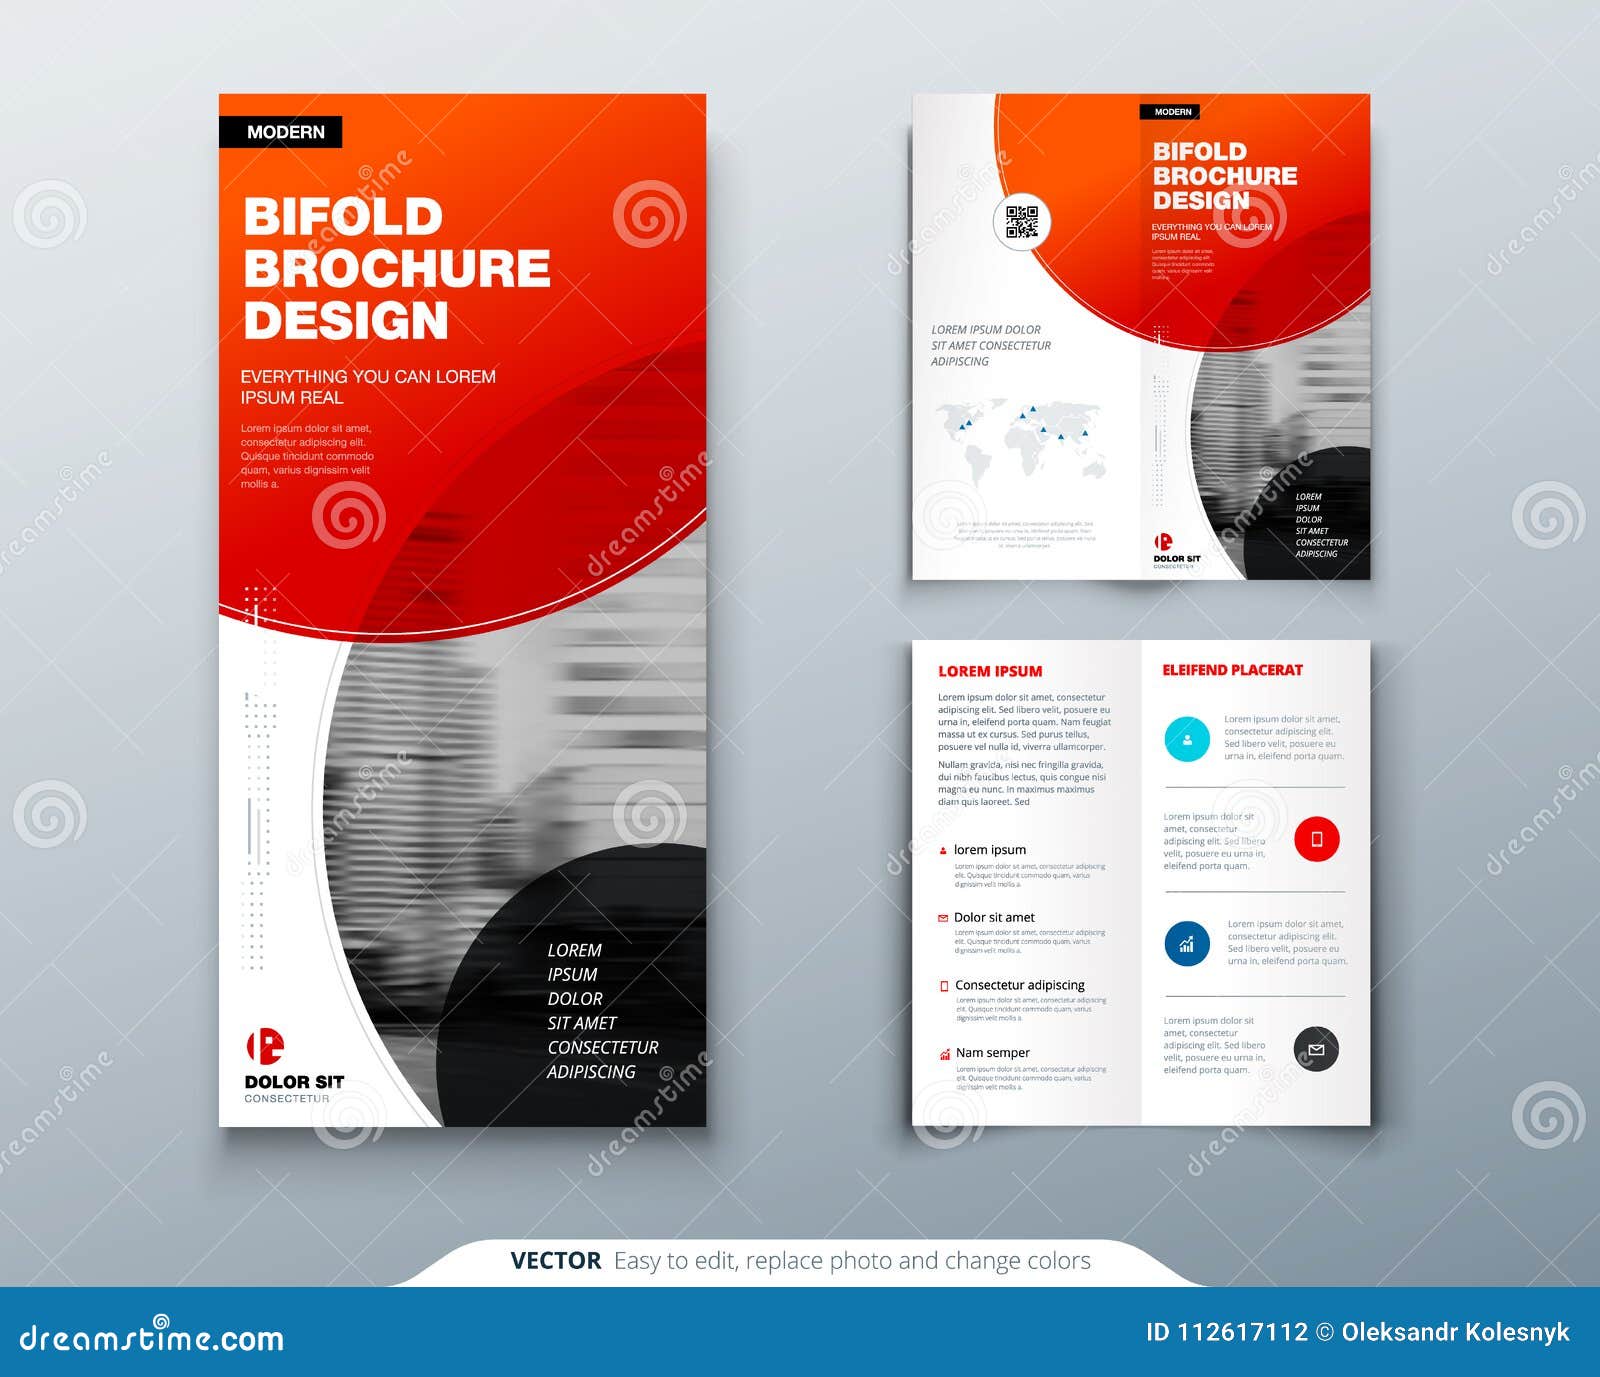 Tri Fold Brochure Design Red Business Template For Tri Fold Flyer Layout With Modern Circle Photo And Abstract Stock Vector Illustration Of Healthcare Abstract